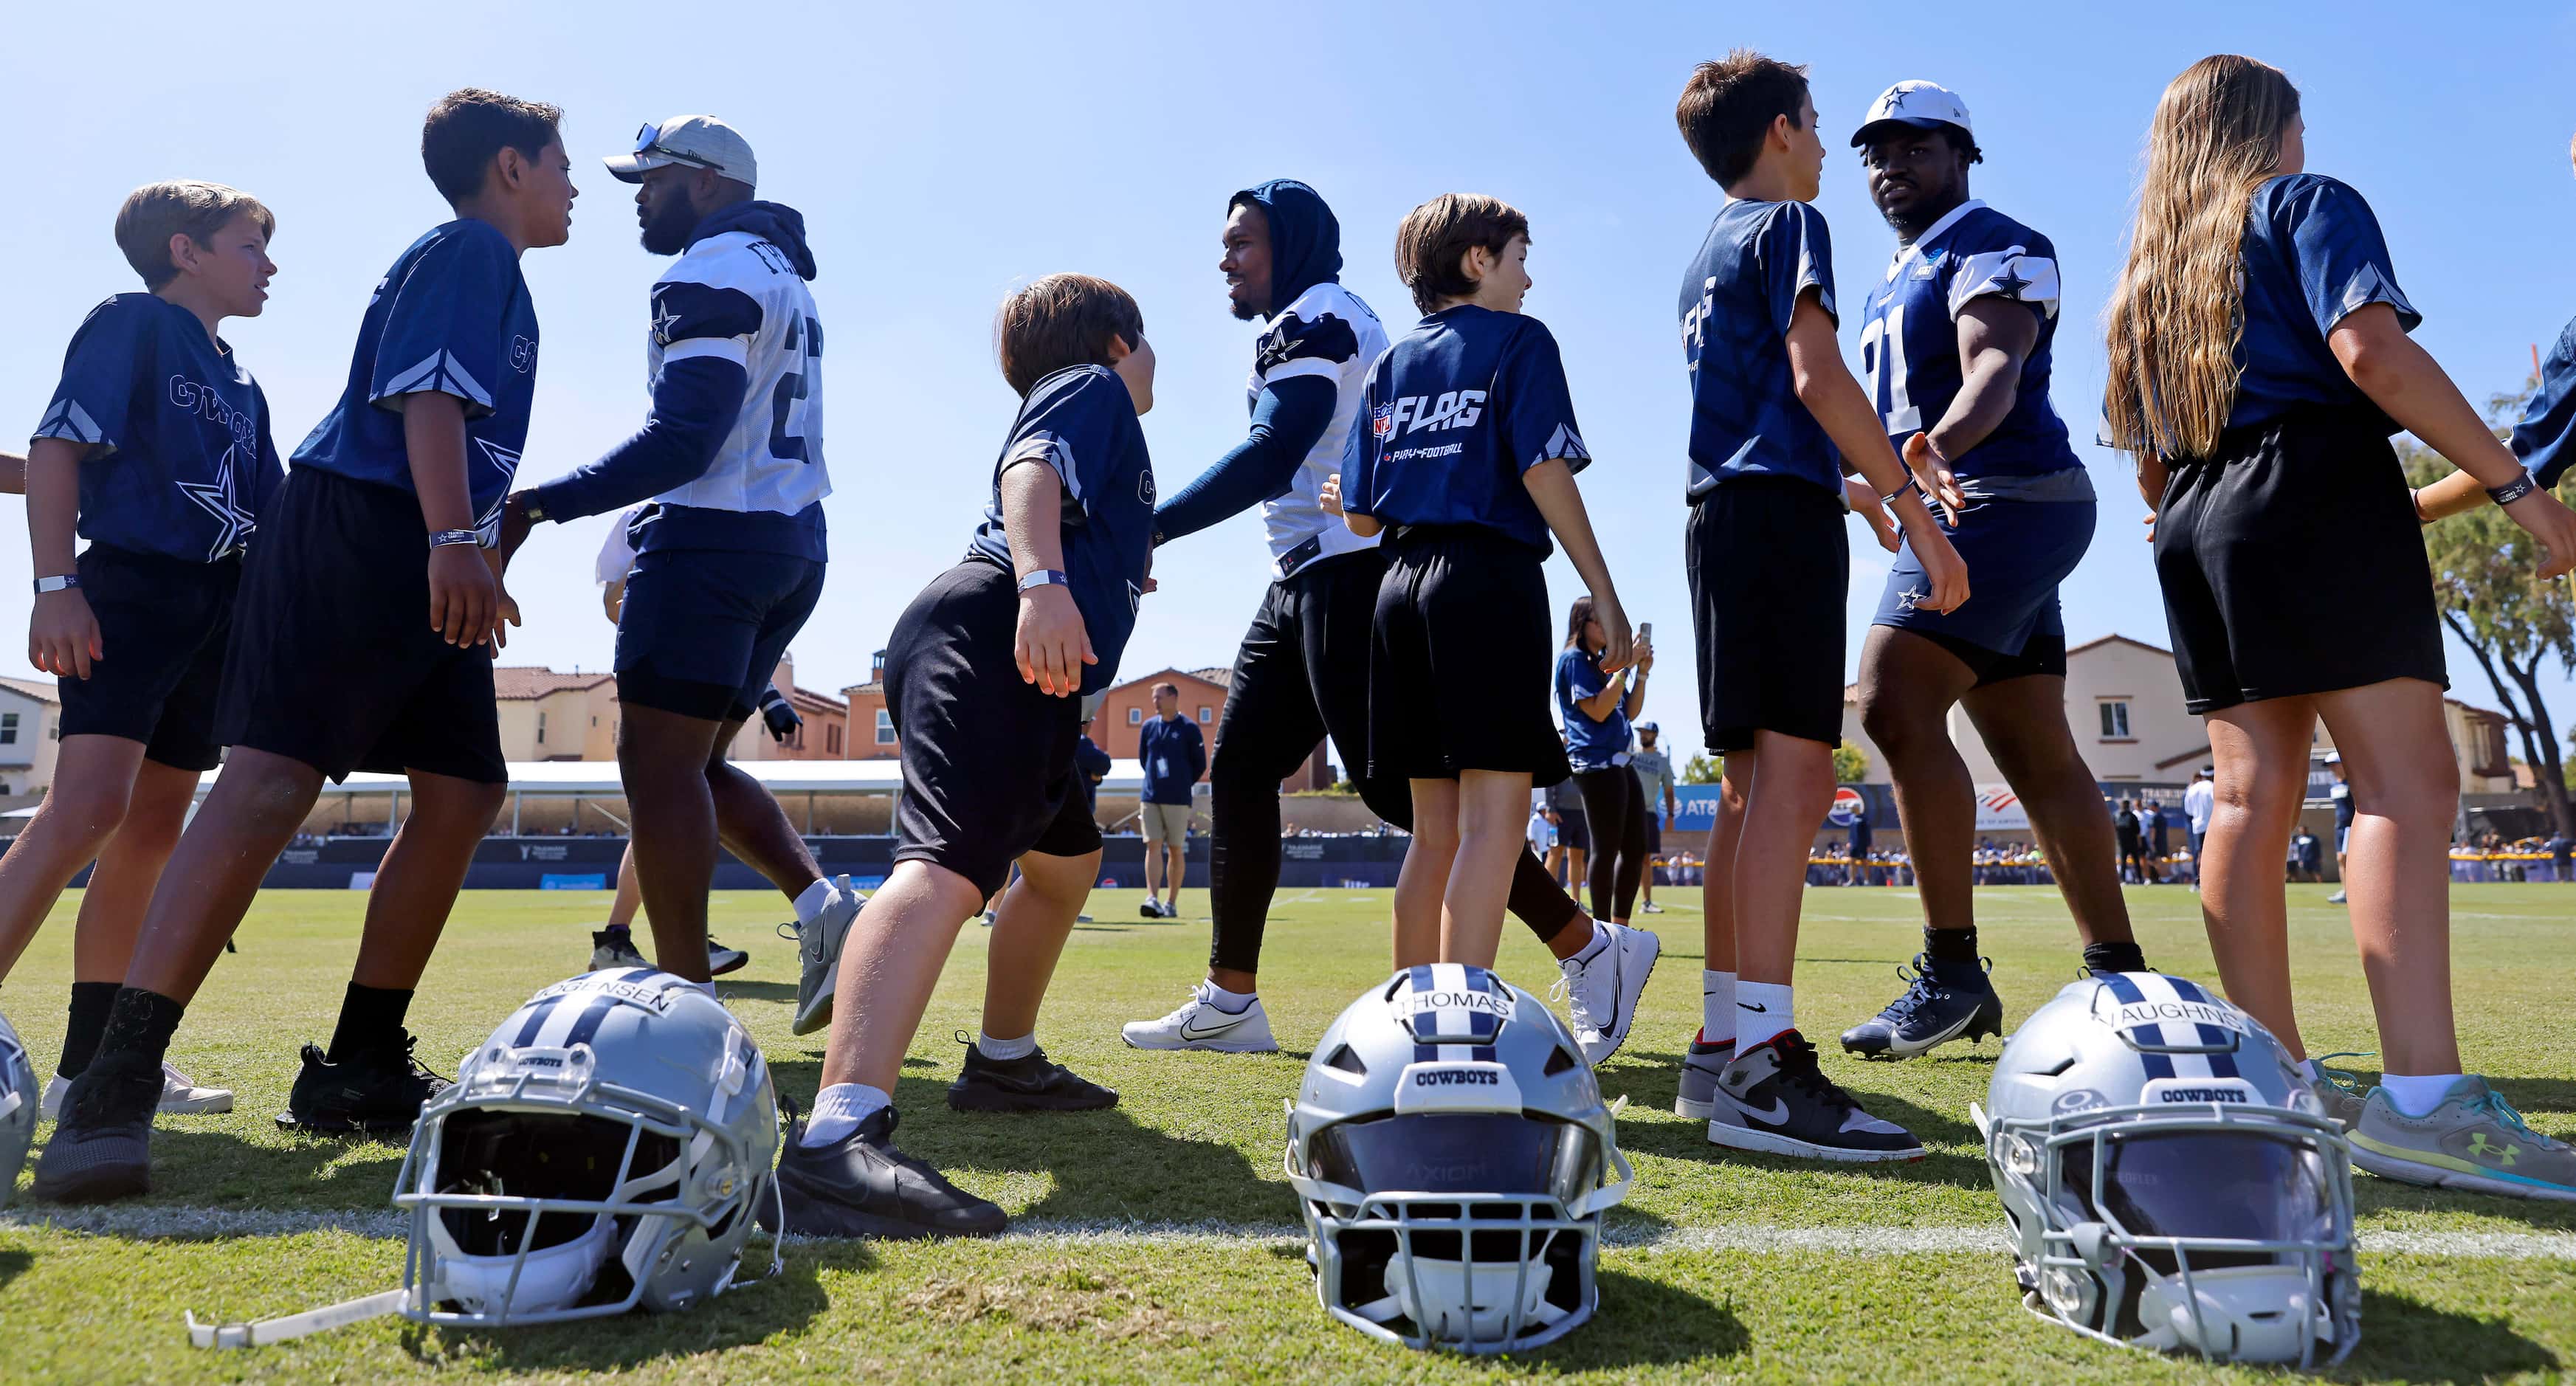 Youth NFL Flag Football players from Ventura County slap hands with Dallas Cowboys players...